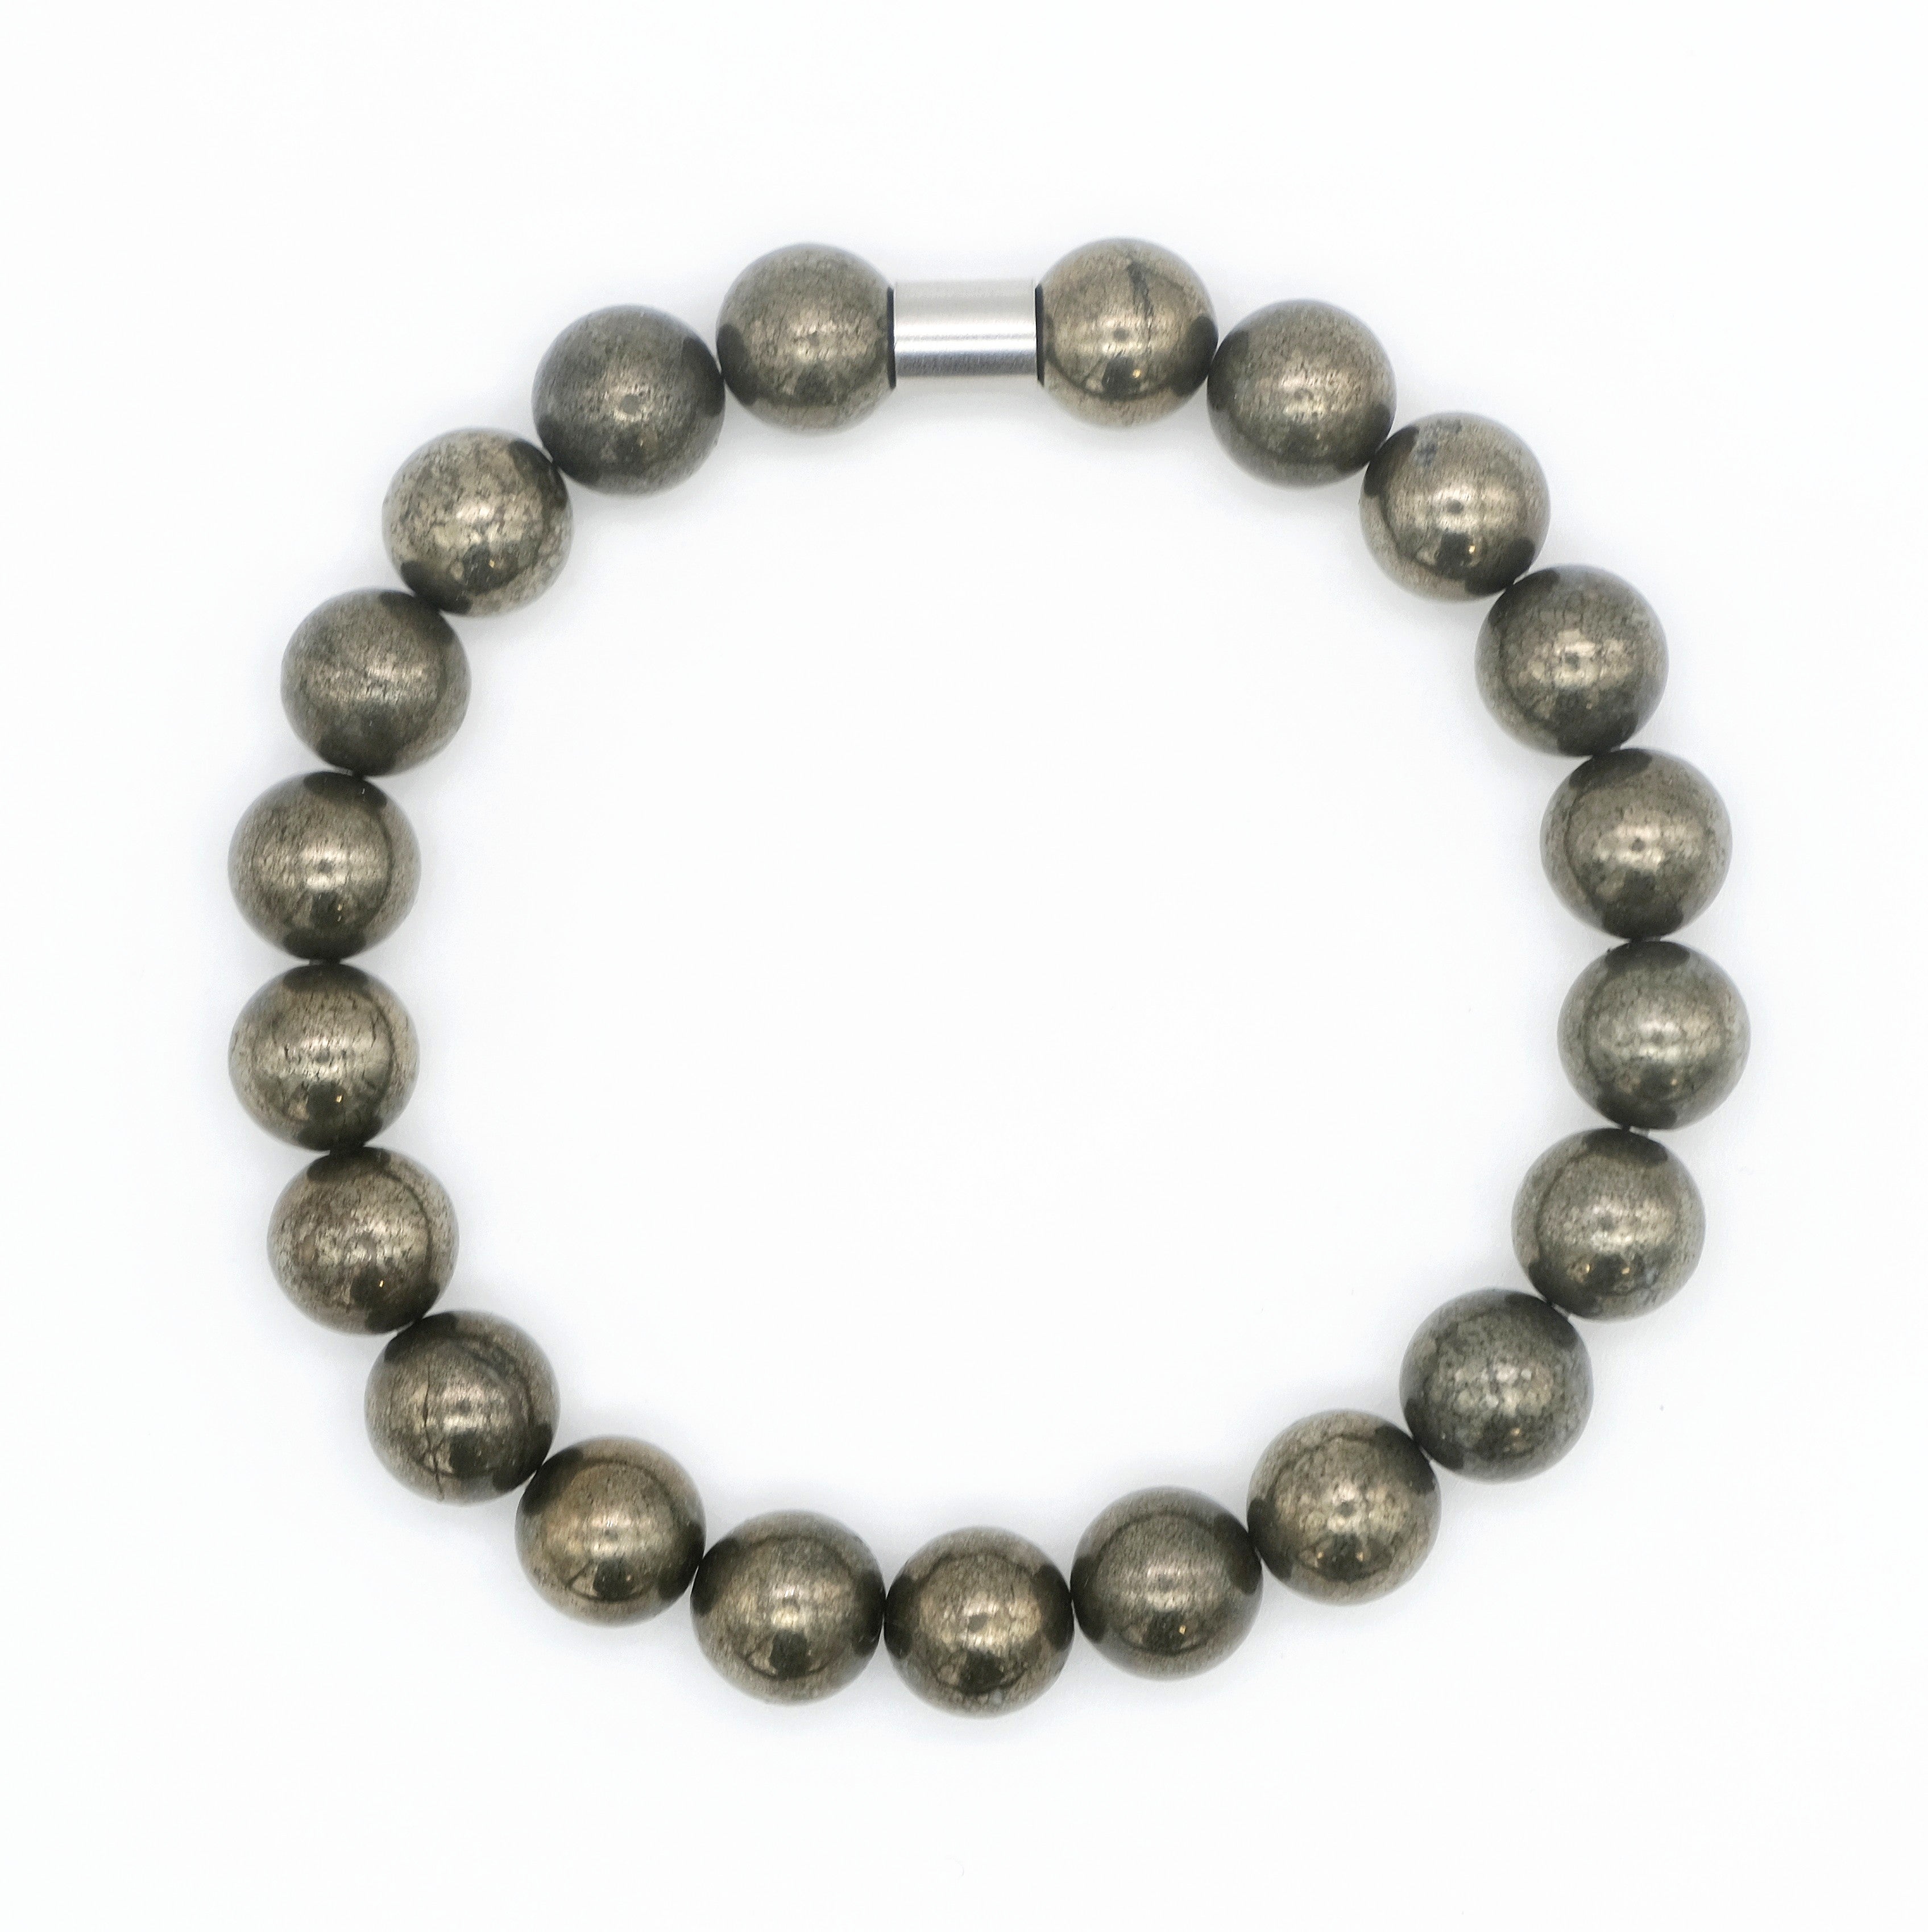 pyrite gemstone bracelet in 10mm beads with stainless steel column bead from above